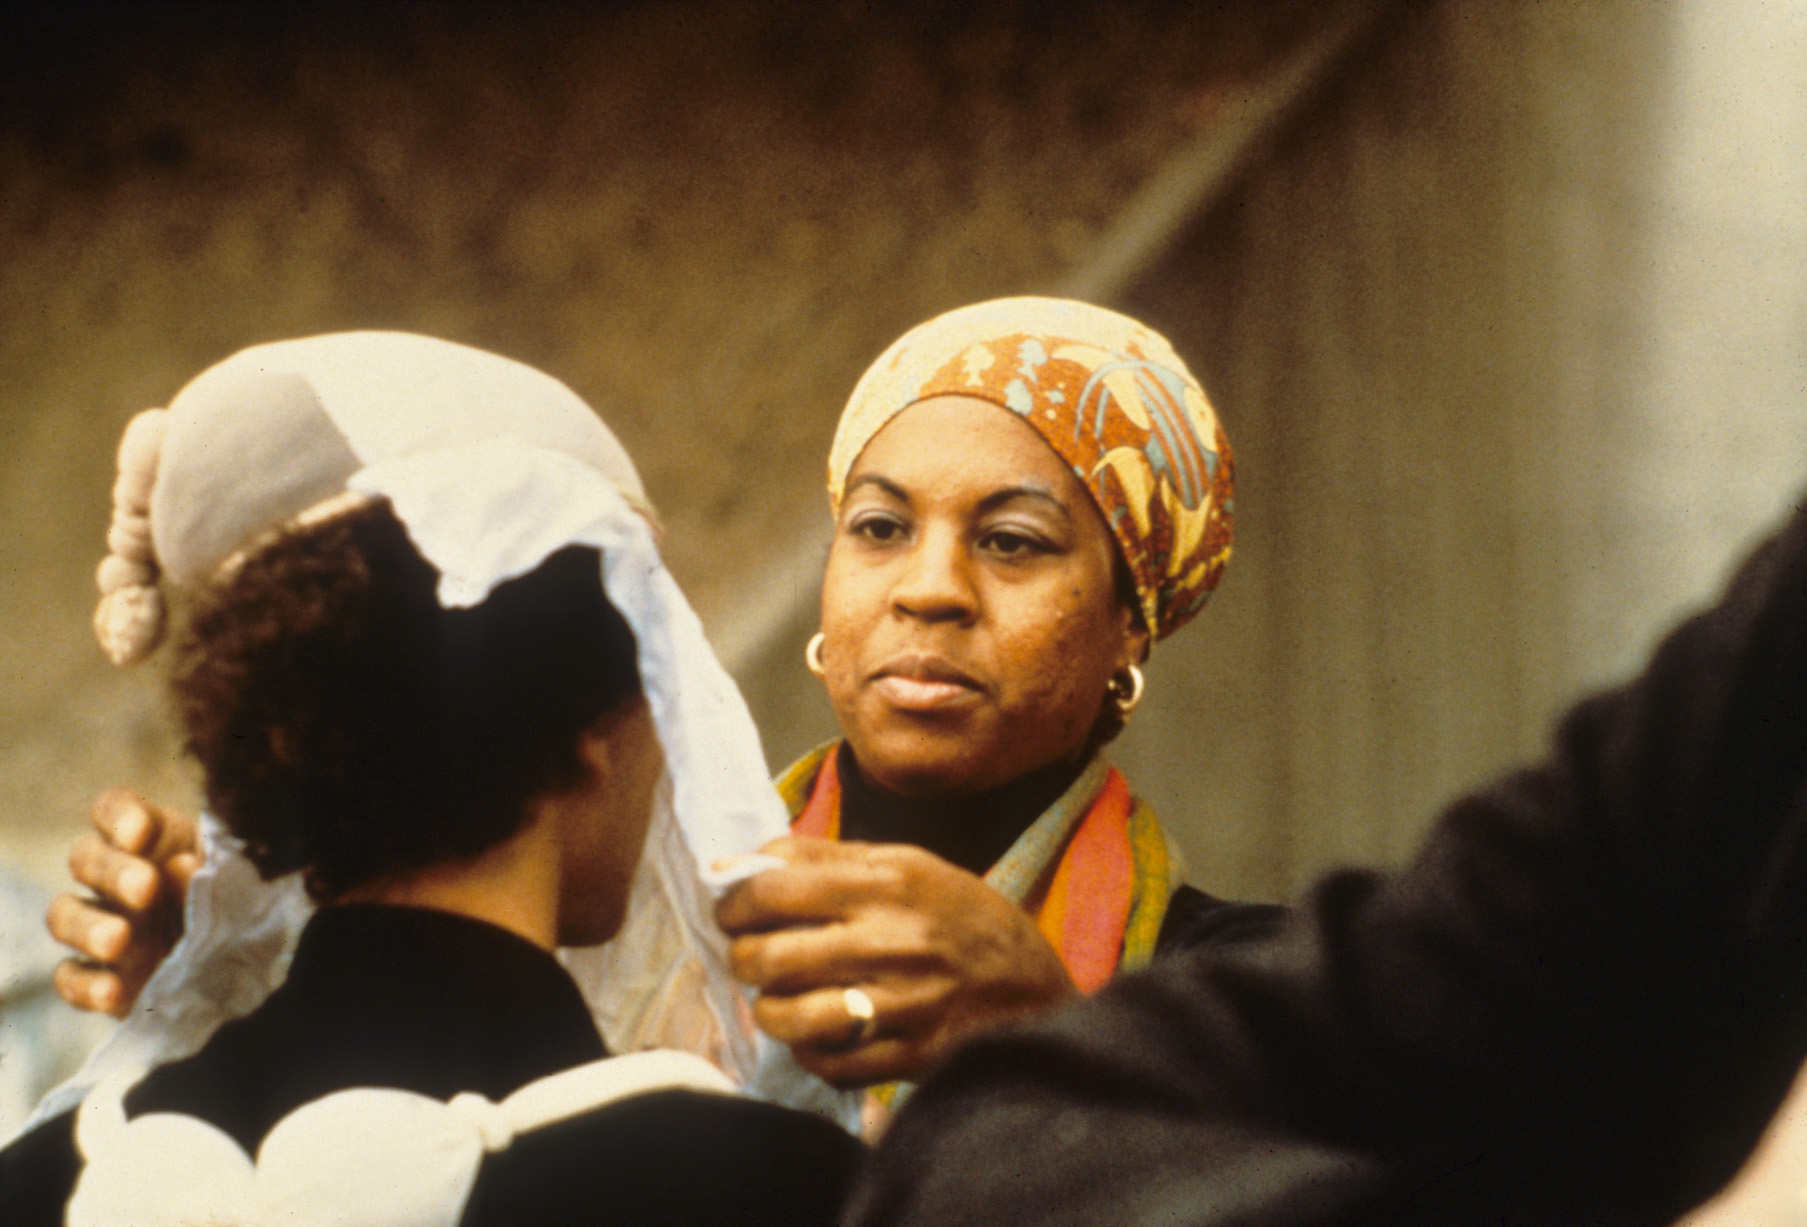 Senga Nengudi, <em>Ceremony for Freeway Fets</em>, March 1978. All Nengudi images courtesy of African American Performance Art Archive and copyright of the artist.